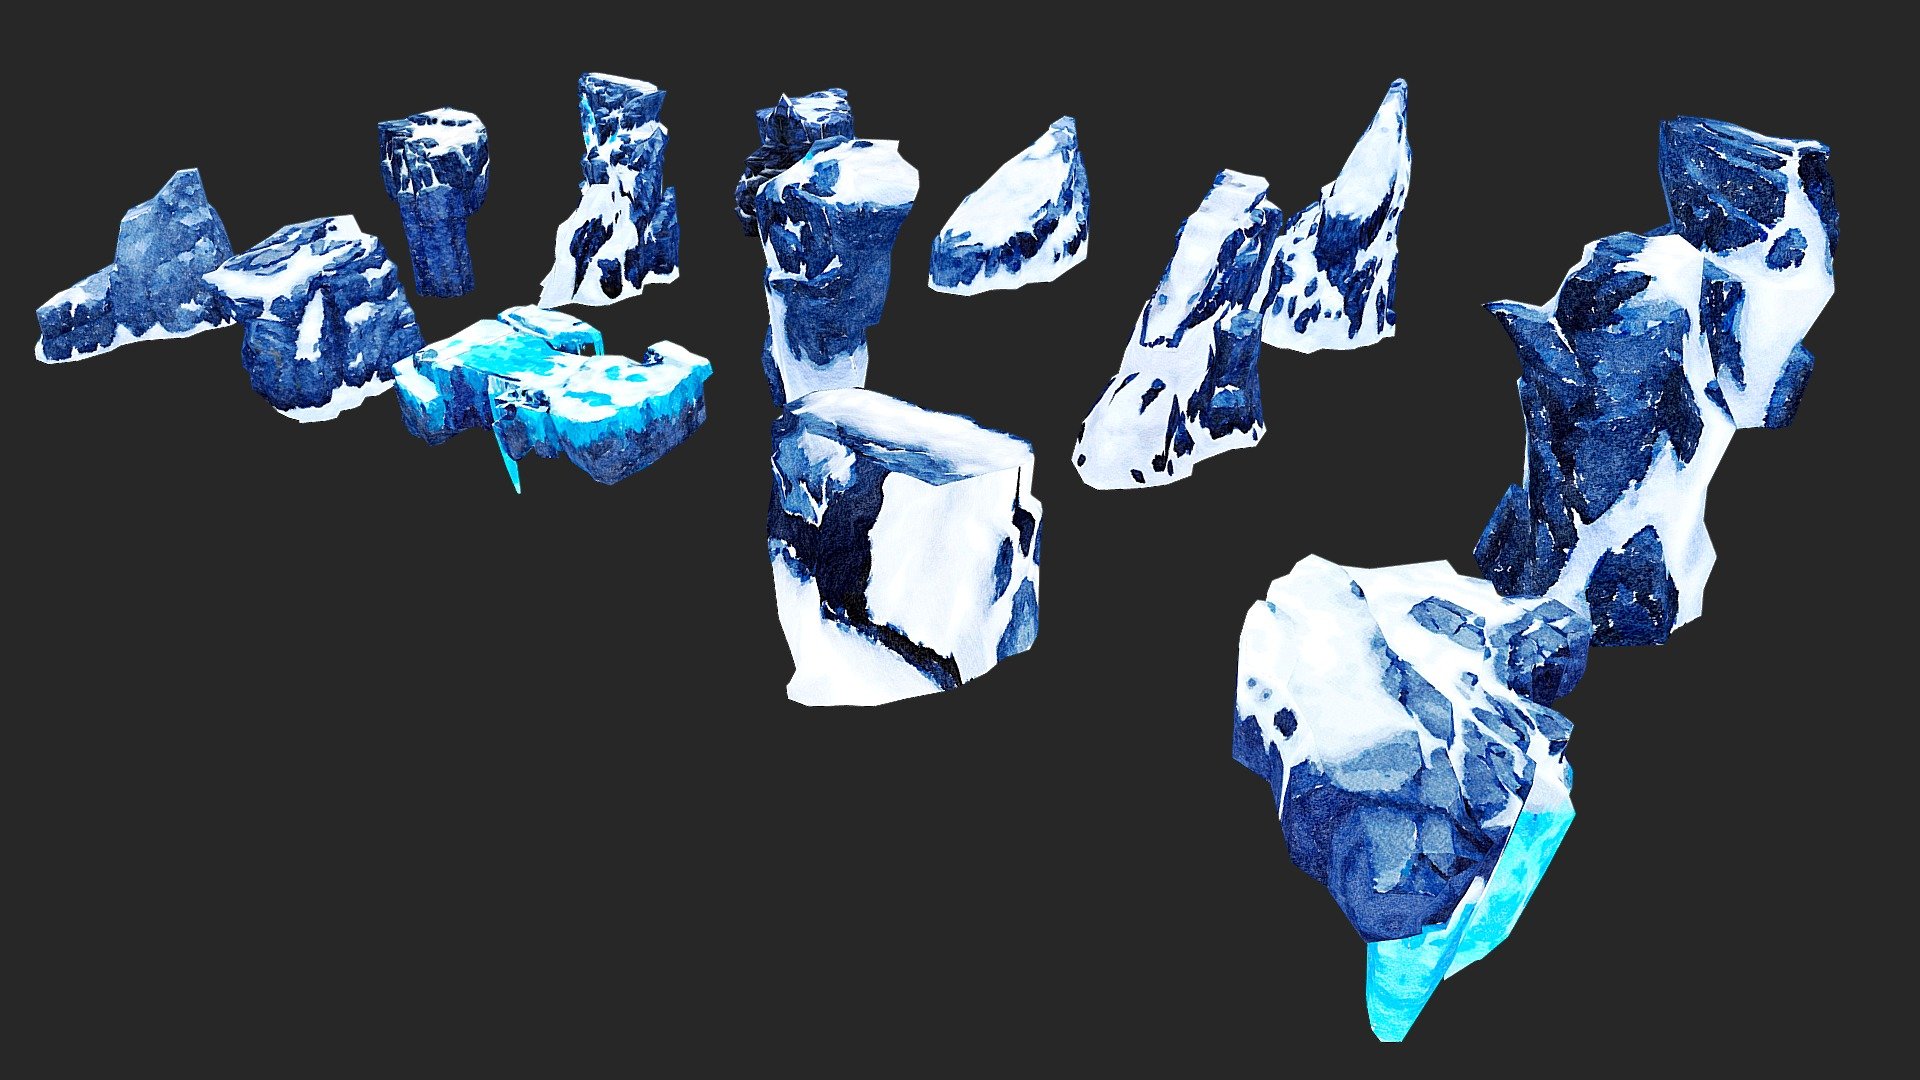 A package of low polygonal Rocks.The package contains 15 objects

Rock 1: 154 Poly, 114 Vert
Rock 2: 456 Poly, 369 Vert
Rock 3: 710 Poly, 667 Vert
Rock 4: 411 Poly, 264 Vert
Rock 5: 469 Poly, 339 Vert
Rock 6: 230 Poly, 140 Vert
Rock 7: 403 Poly, 270 Vert
Rock 8: 242 Poly, 154 Vert
Rock 9: 428 Poly, 294 Vert
Rock 10: 296 Poly, 280 Vert
Rock 11: 197 Poly, 145 Vert
Rock 12: 438 Poly, 302 Vert
Rock 13: 143 Poly, 208 Vert
Rock 14: 460 Poly, 465 Vert
Rock 15: 984 Poly, 574 Vert




Only Textures Diffus duplicated in resolution 1024 x 1024. Format textures of PNG. Files include: 3Dsmax, 3Ds, Obj, Fbx and folder with textures. Ready import to game project (Unity, Unreal)
If there is a need for any type of model, send a message! We will provide. 
Thanks for your interest and love! 



Note: Watercolor style illustrations 
It is recommended to use flat lighting or shaderless material - Low Poly Stone Illustration Part 5 - Game Ready - 3D model by josluat91 3d model